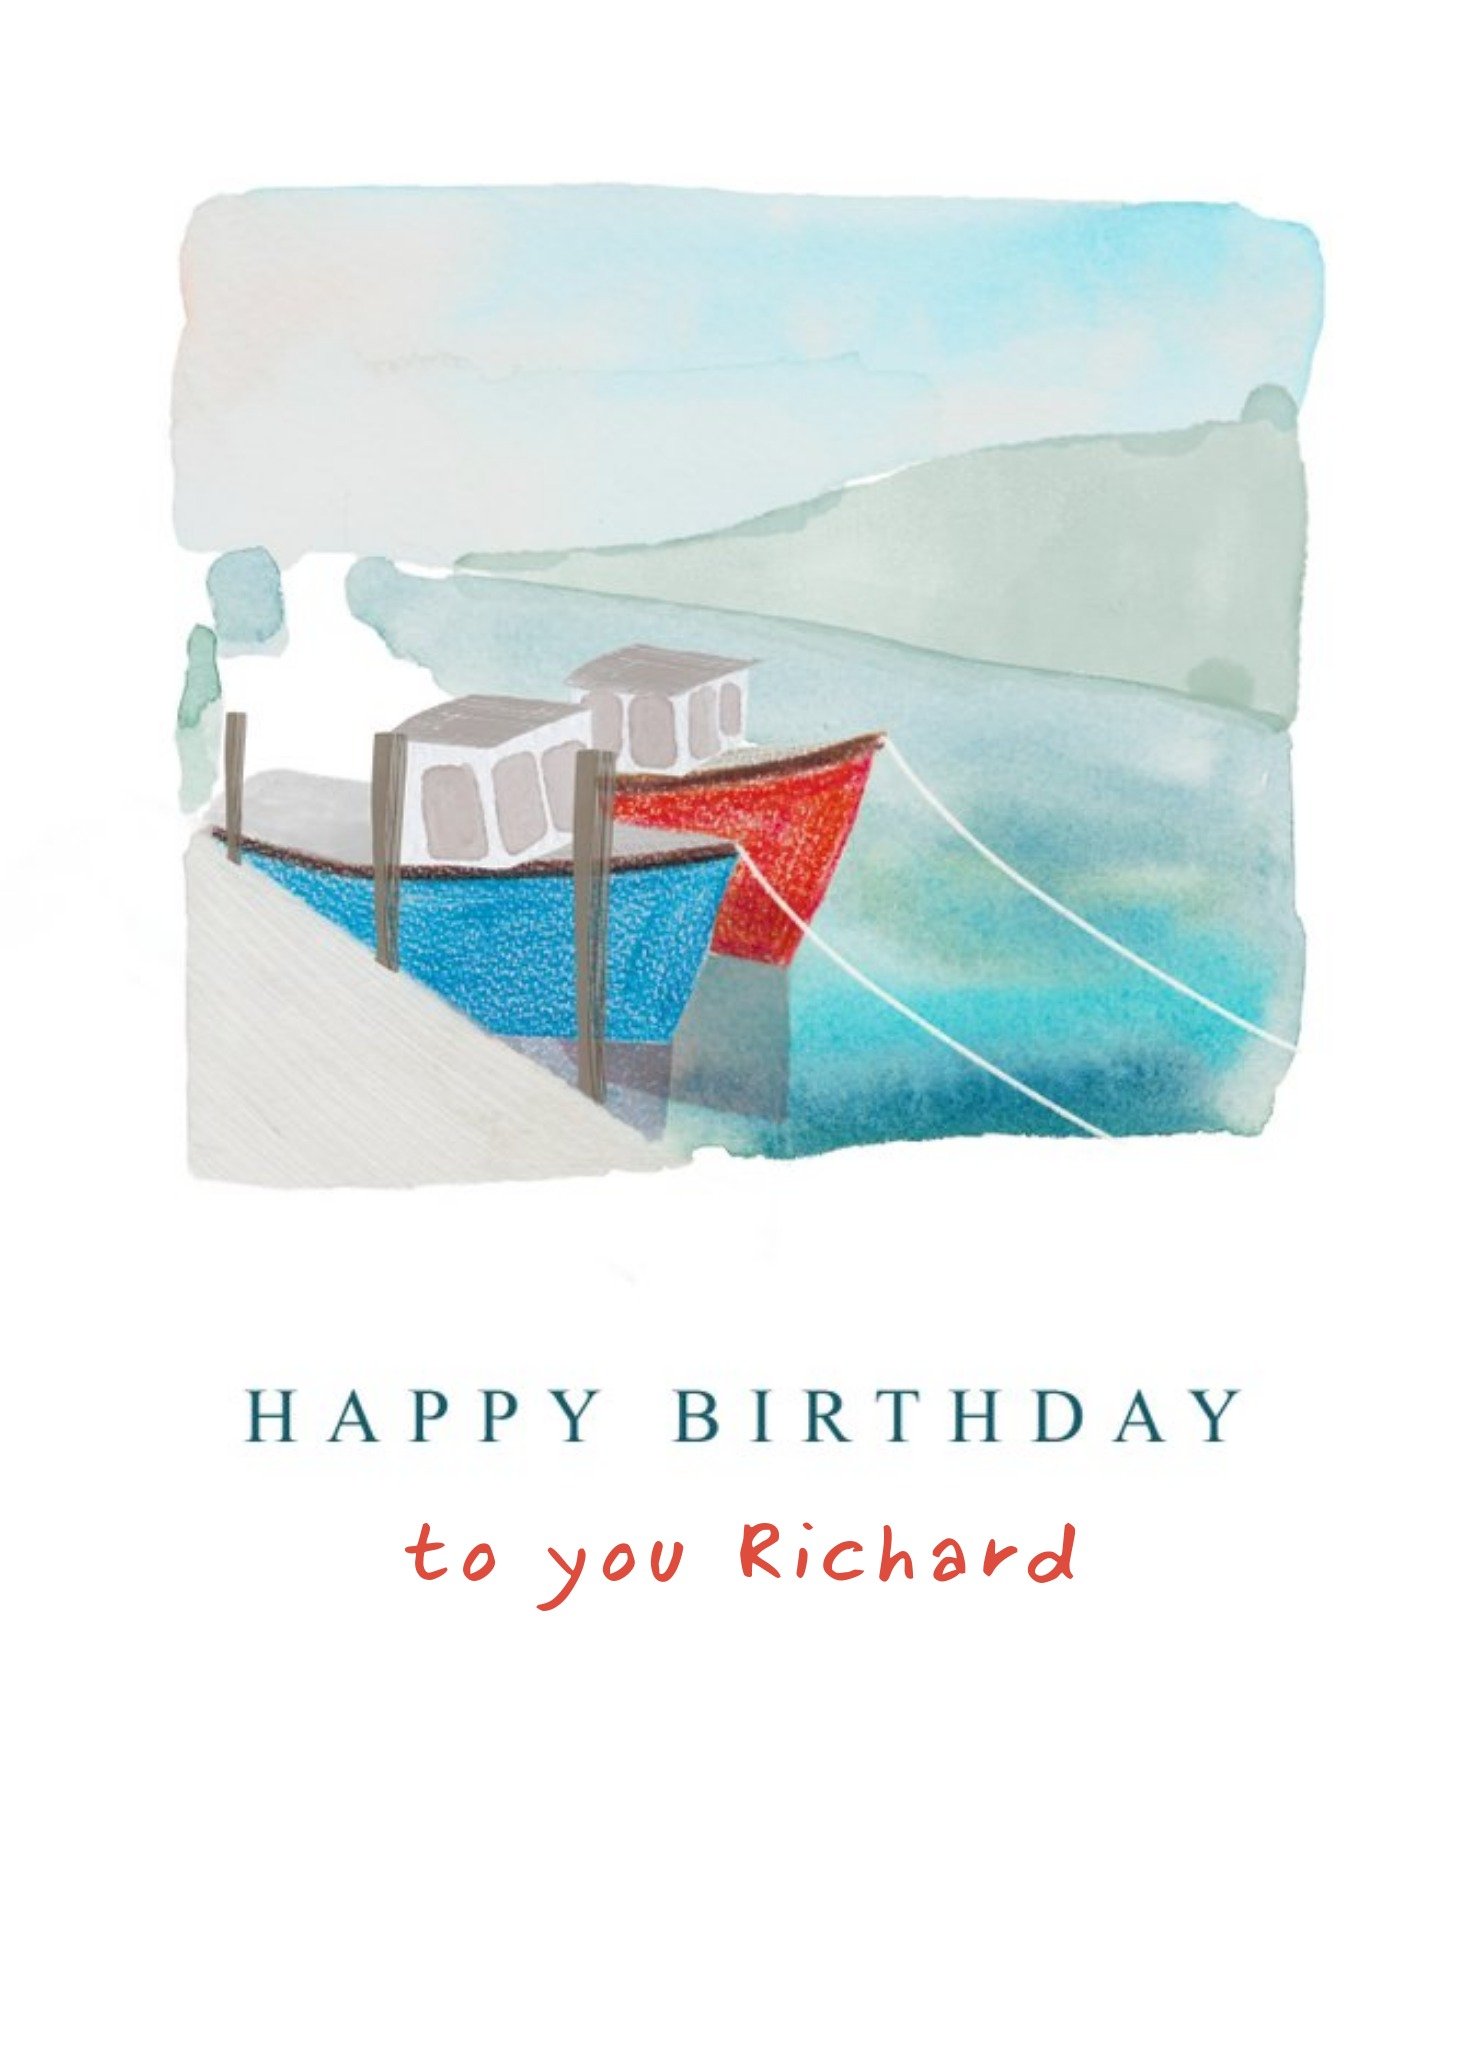 Moonpig Set The Scene Watercolour Boats In A Seaside Harbour Birthday Card Ecard